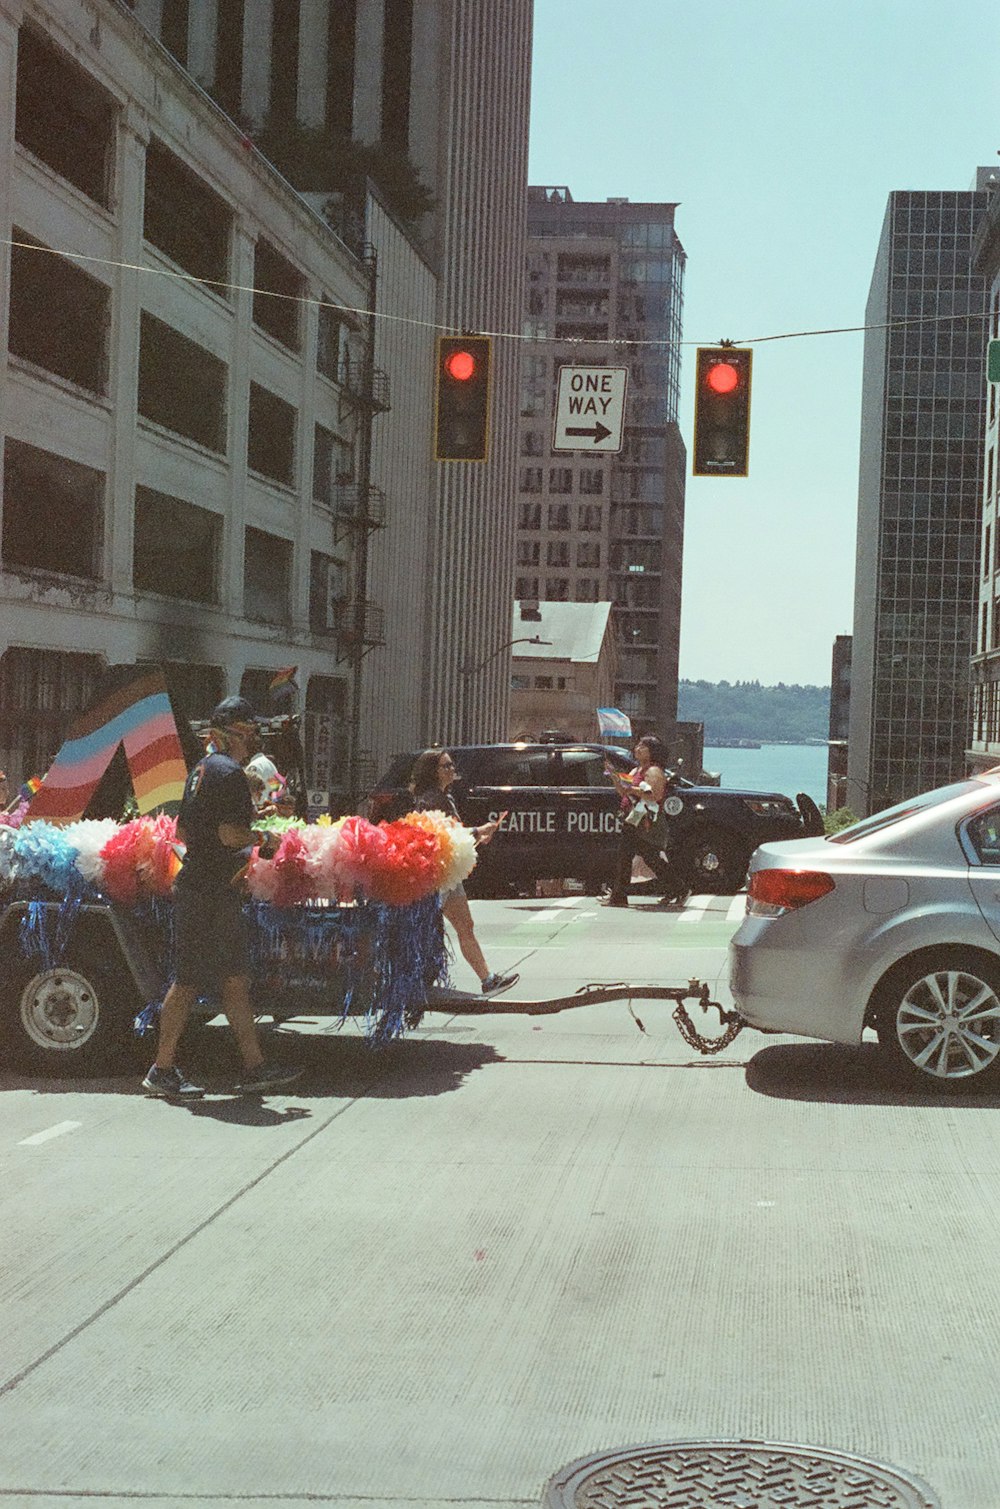 a person pulling a cart with balloons on a city street